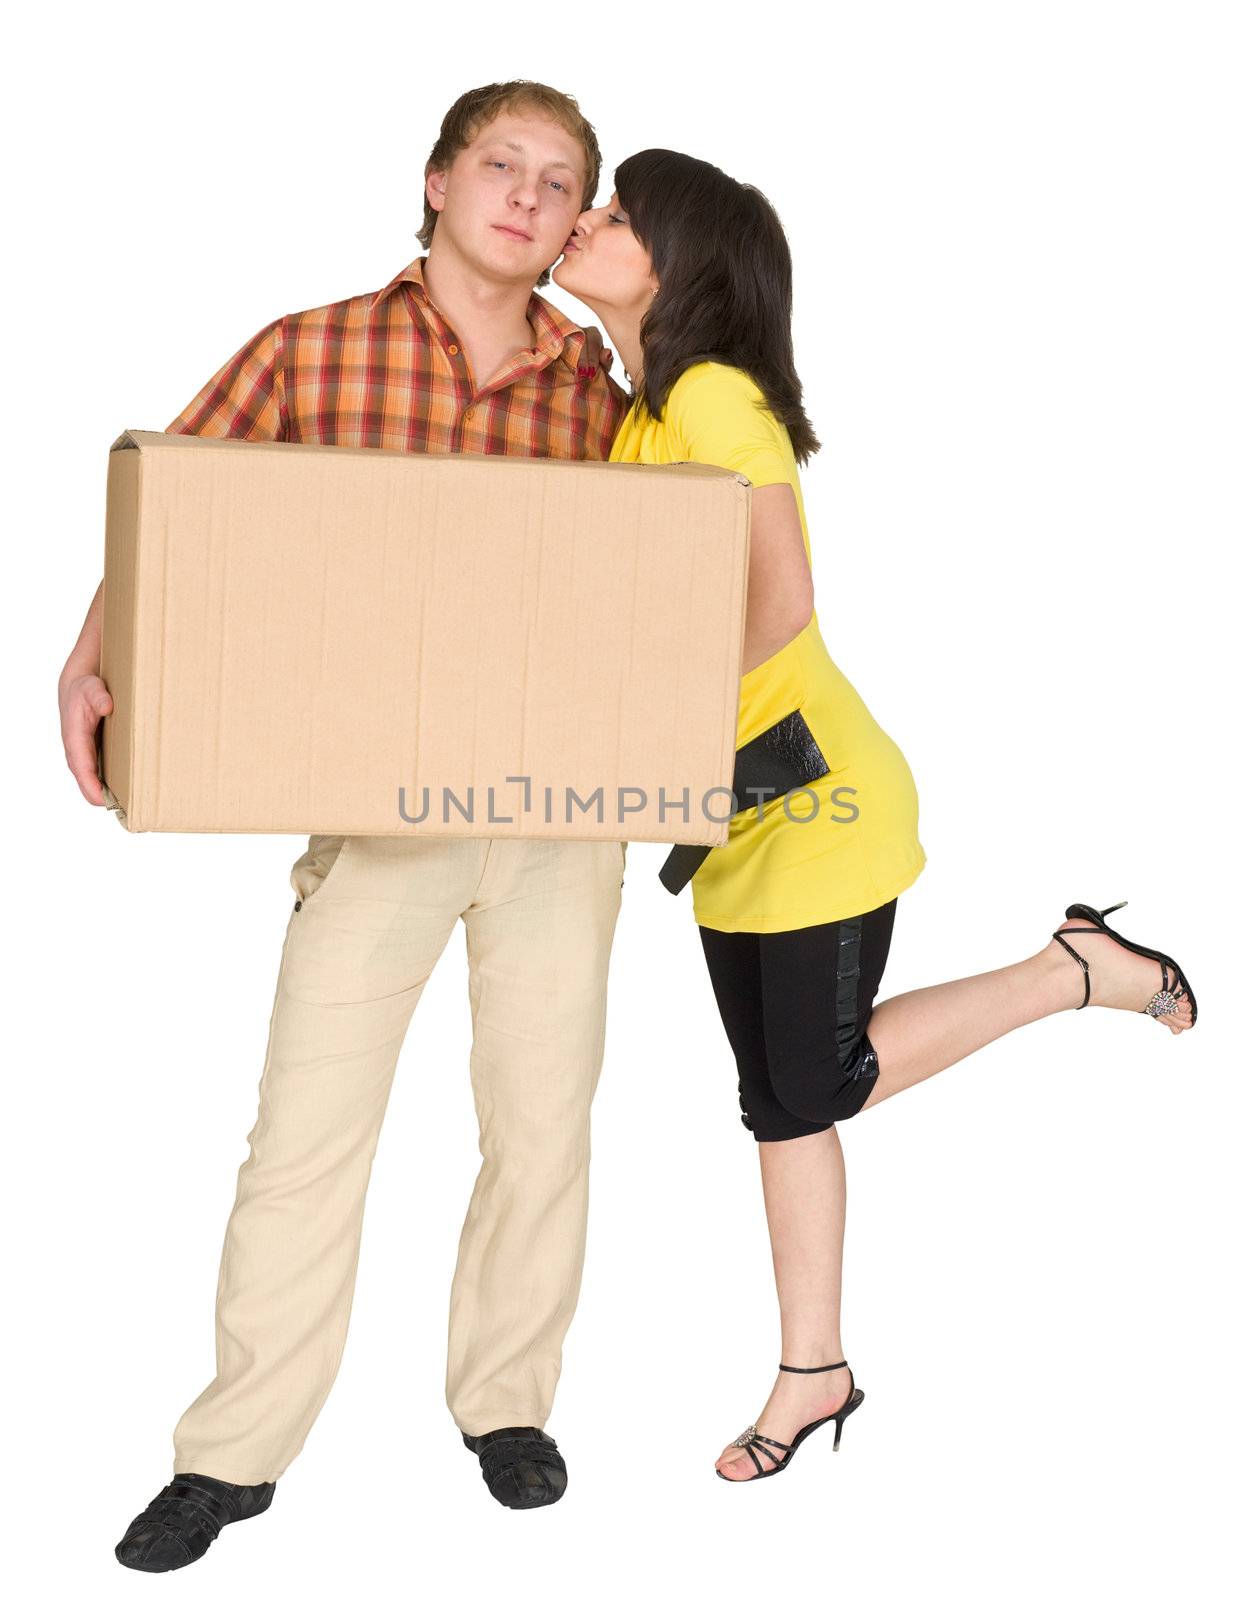 The girl kisses the guy holding a box